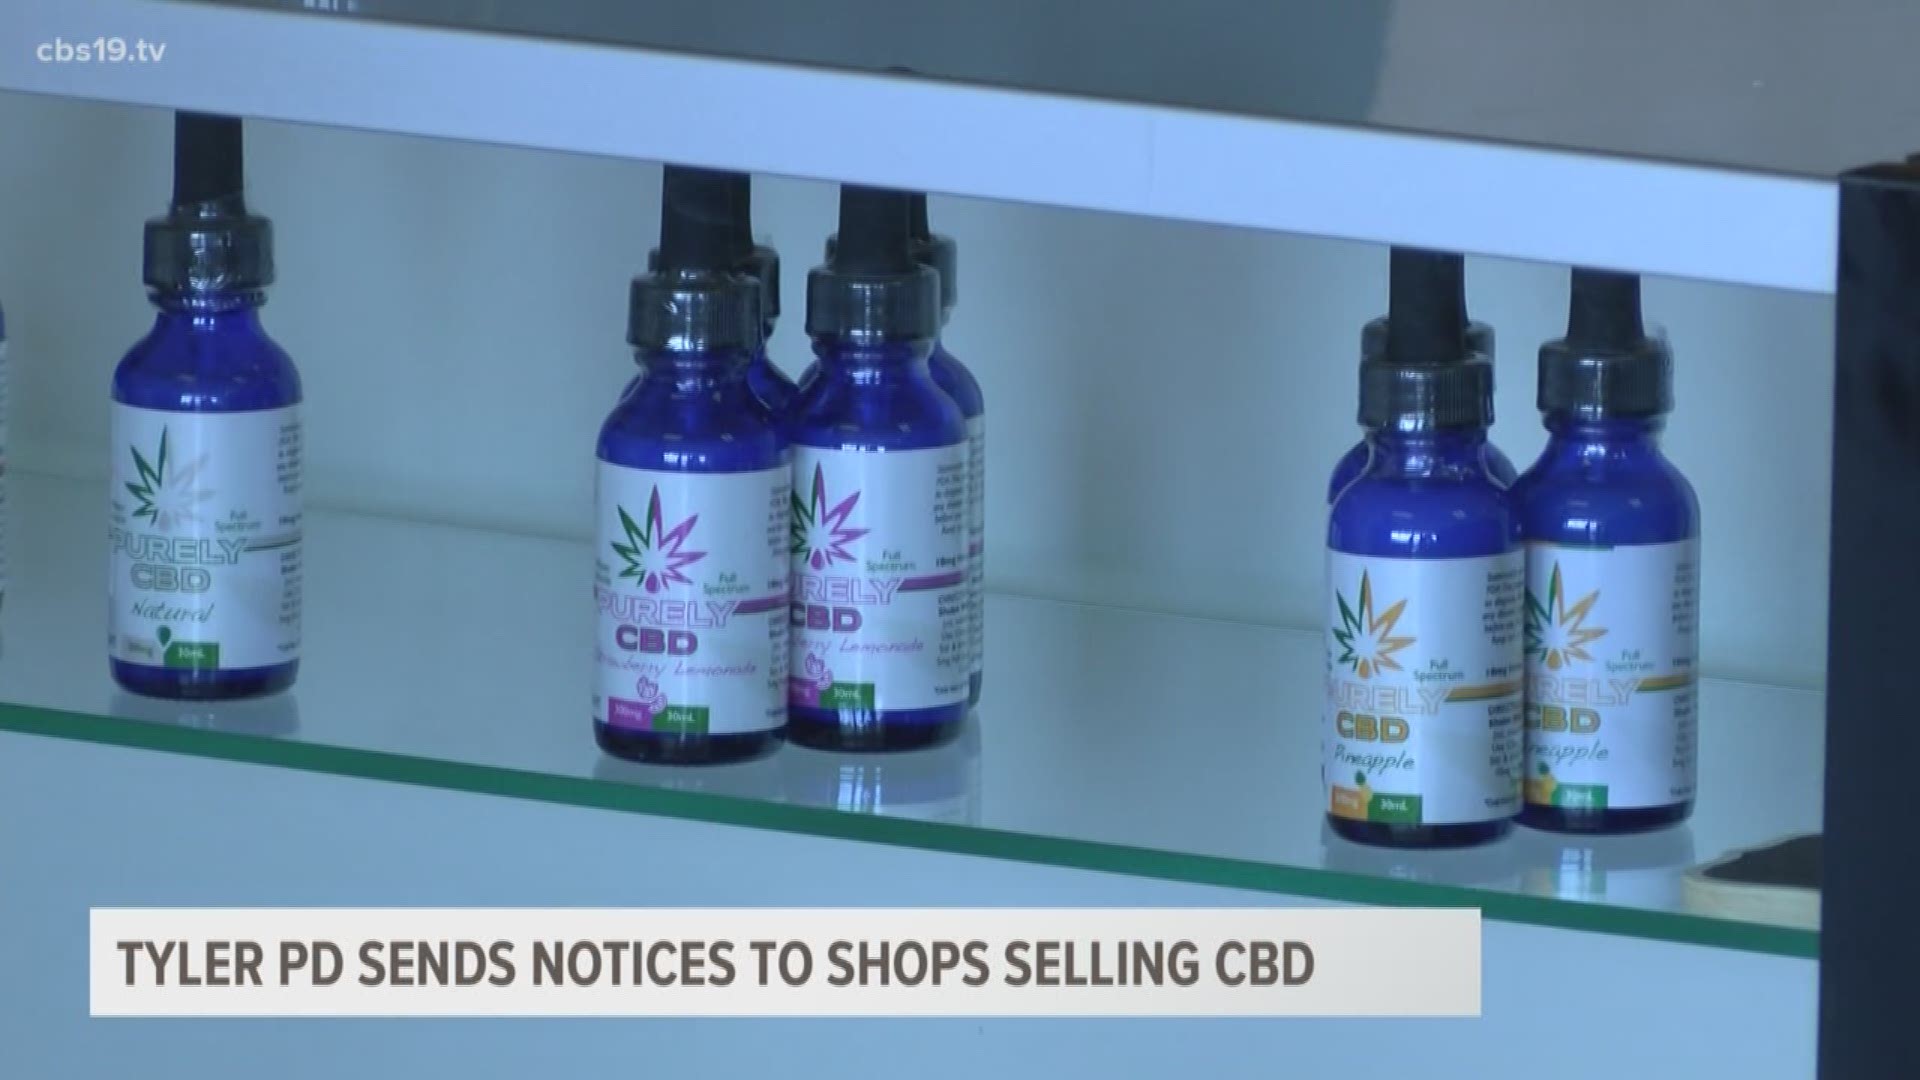 The Tyler Police Department sent out letters to various businesses with a warning about CBD products.